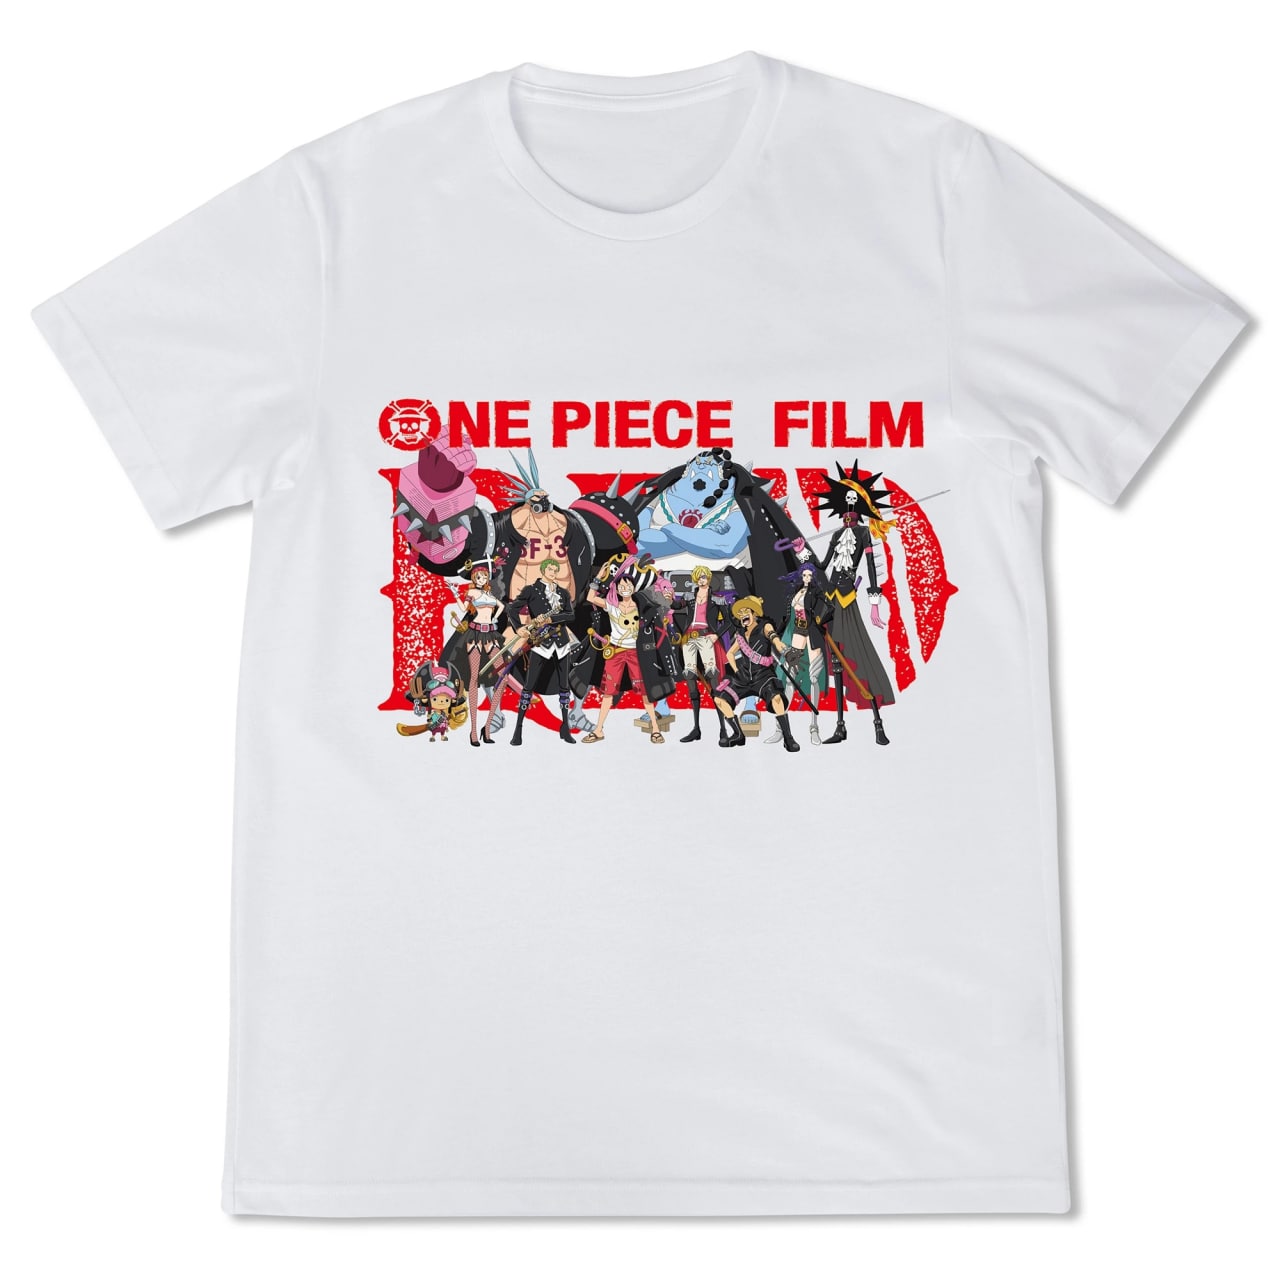 One Piece Film: Red T-shirts – Movie Poster Graphic T-Shirt